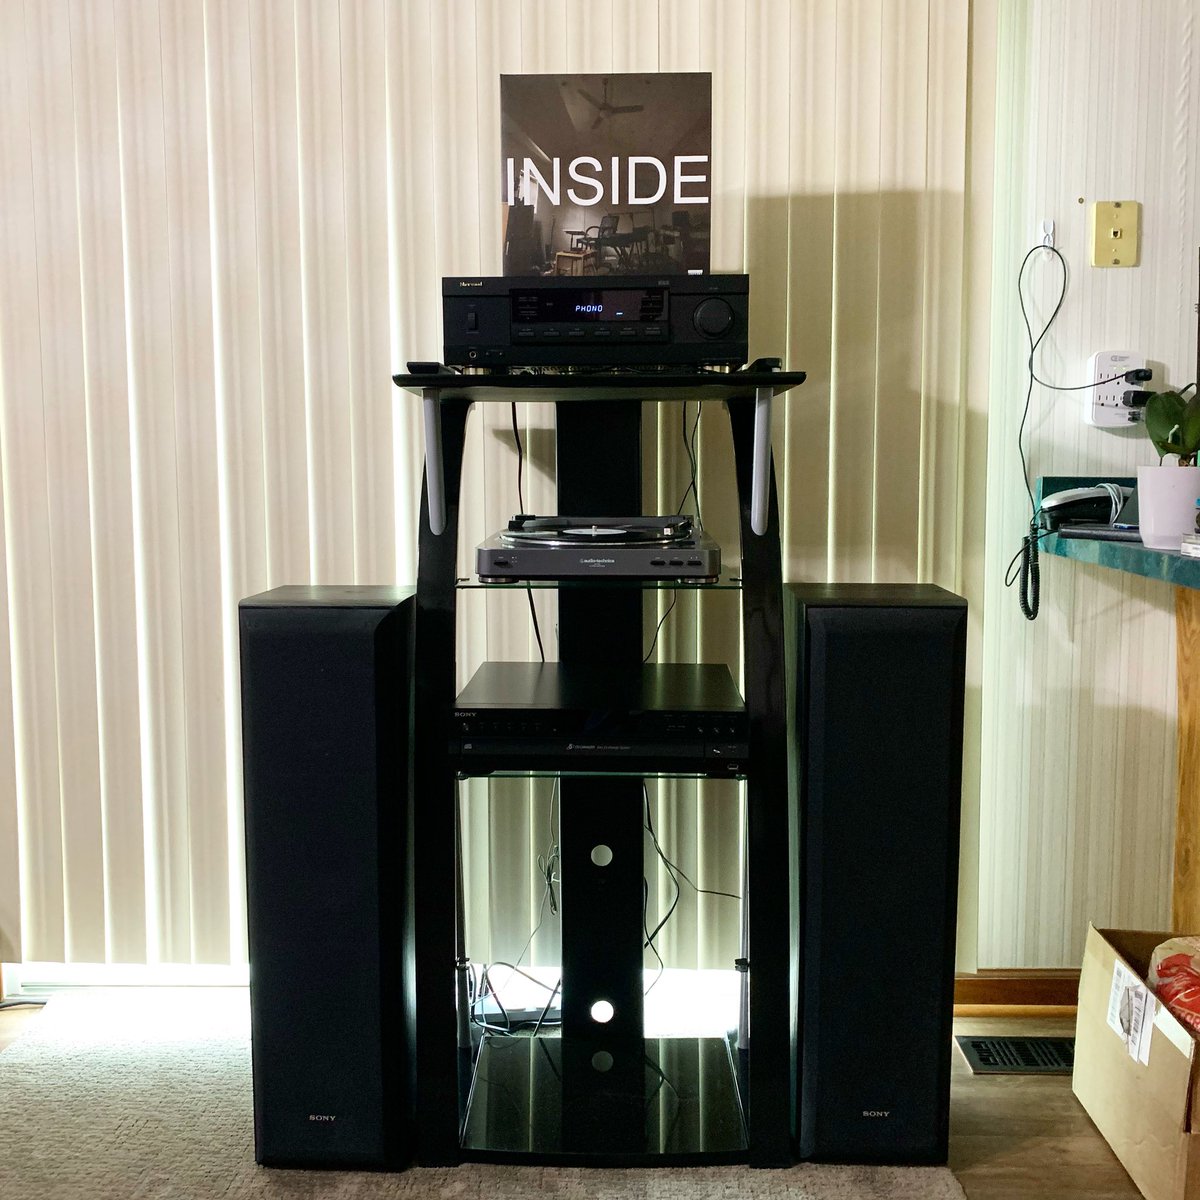 I did a thing today! 😂 I moved my #stereosystem downstairs so I can listen to it a little more often. 😎 (And I know, not the greatest picture…) #racksystem #BoBurnhamInside #inside #vinylrecord